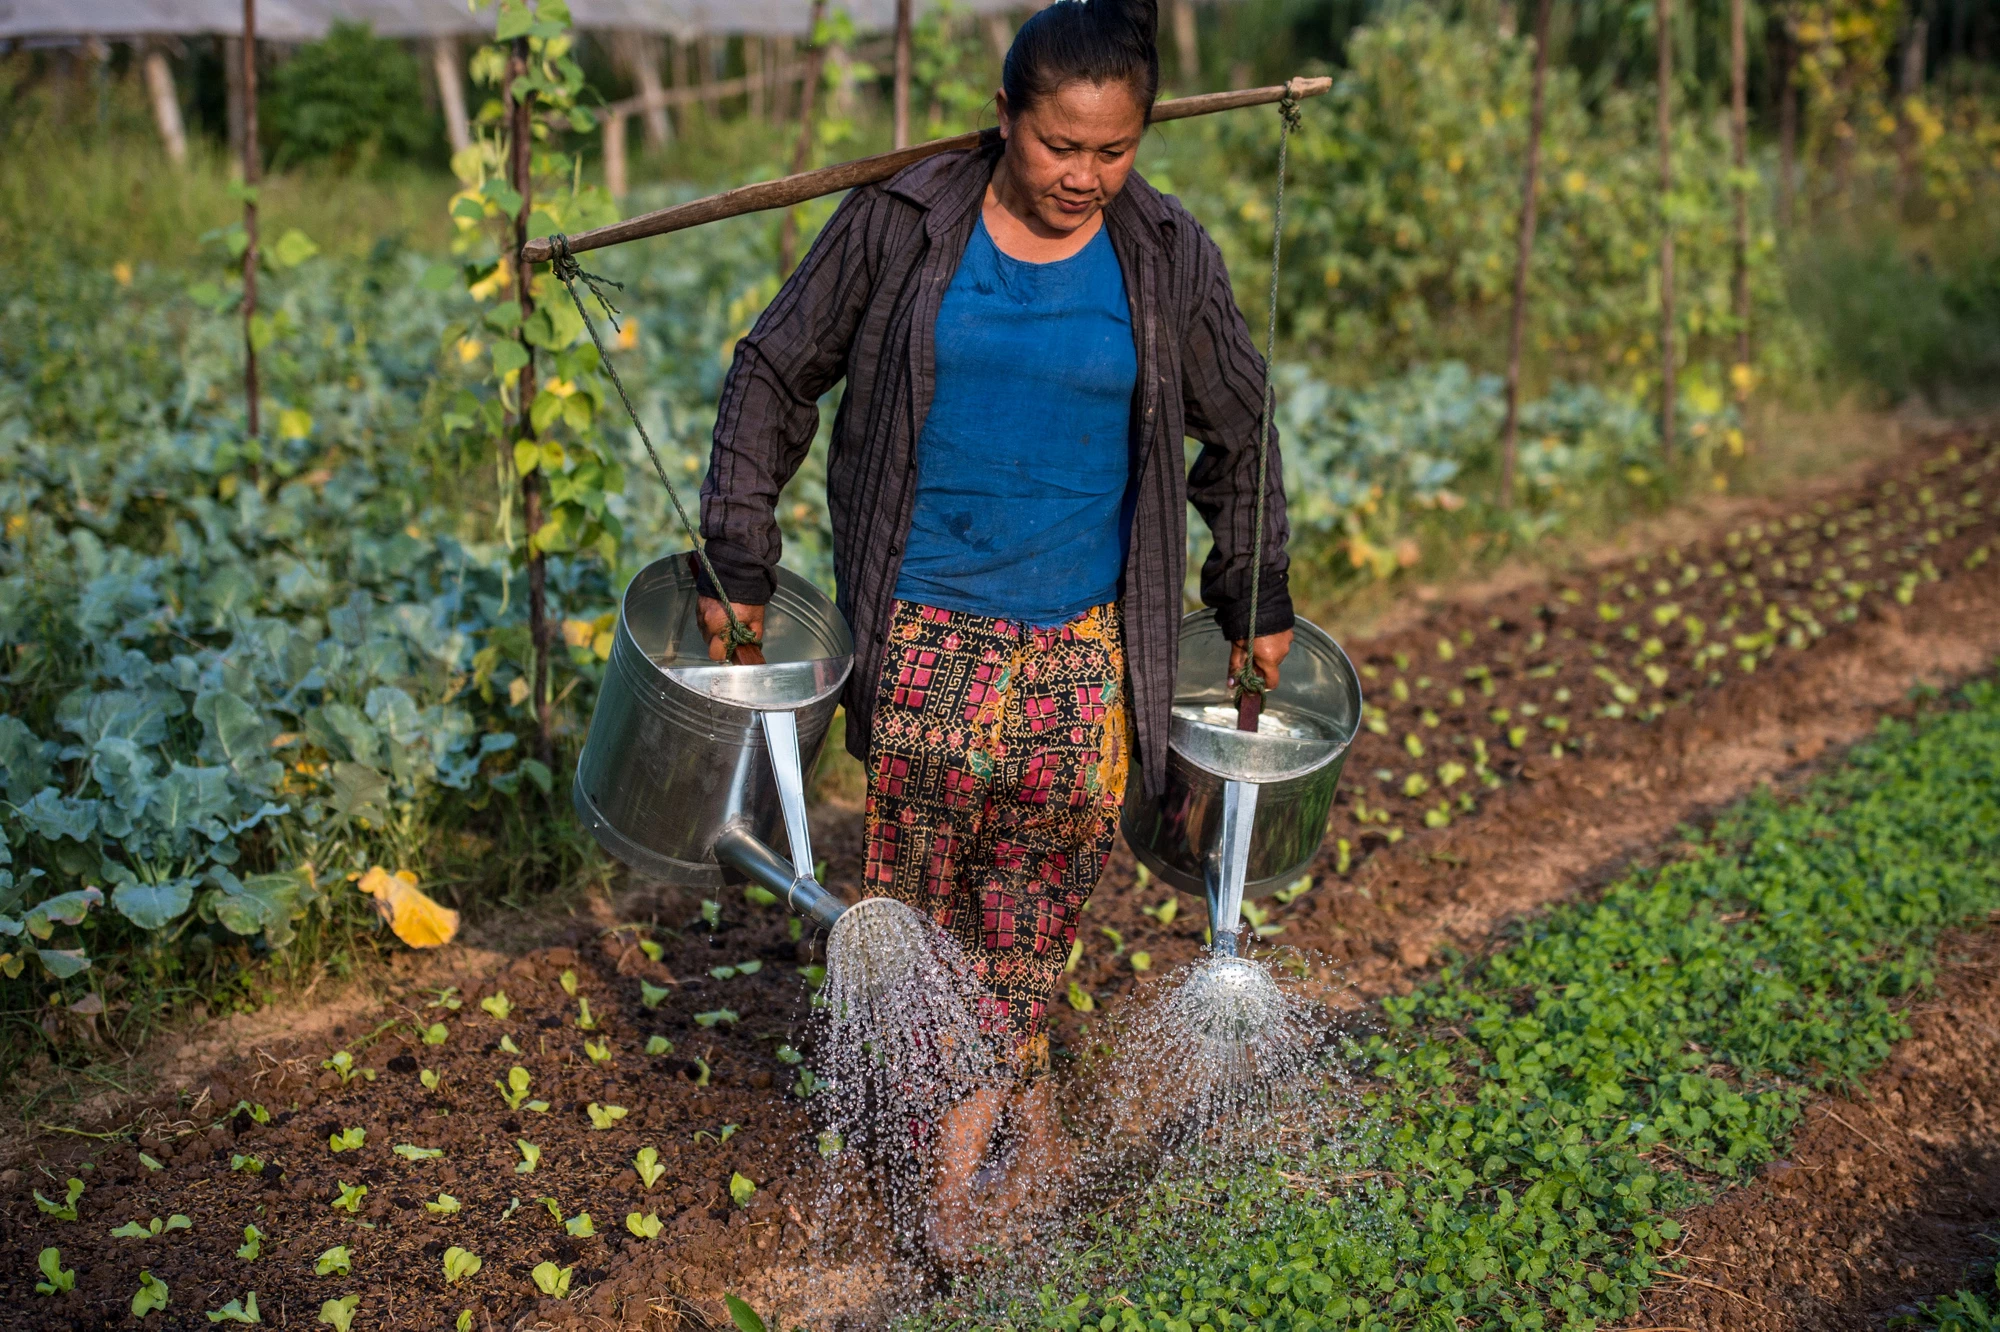 Women in water and agriculture